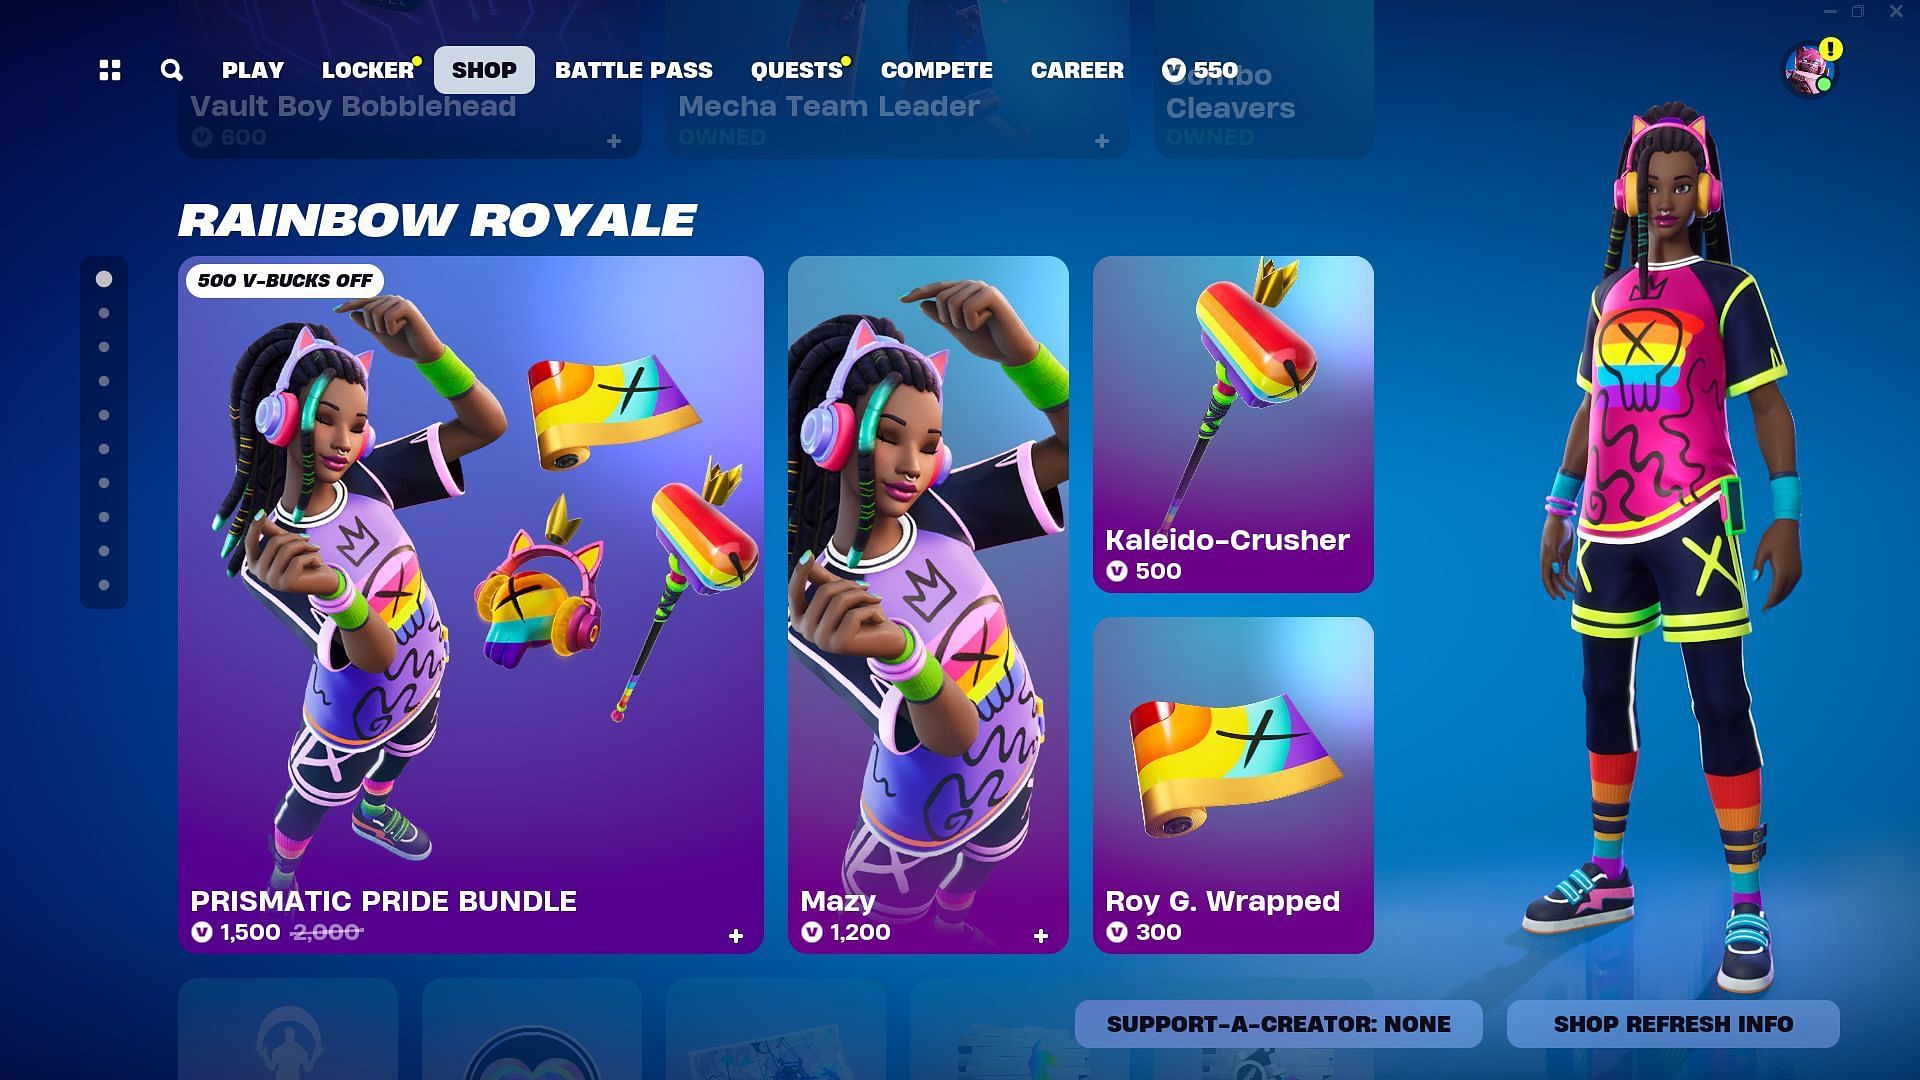 You can now purchase Mazy skin from the Fortnite Item Shop (Image via Epic Games)